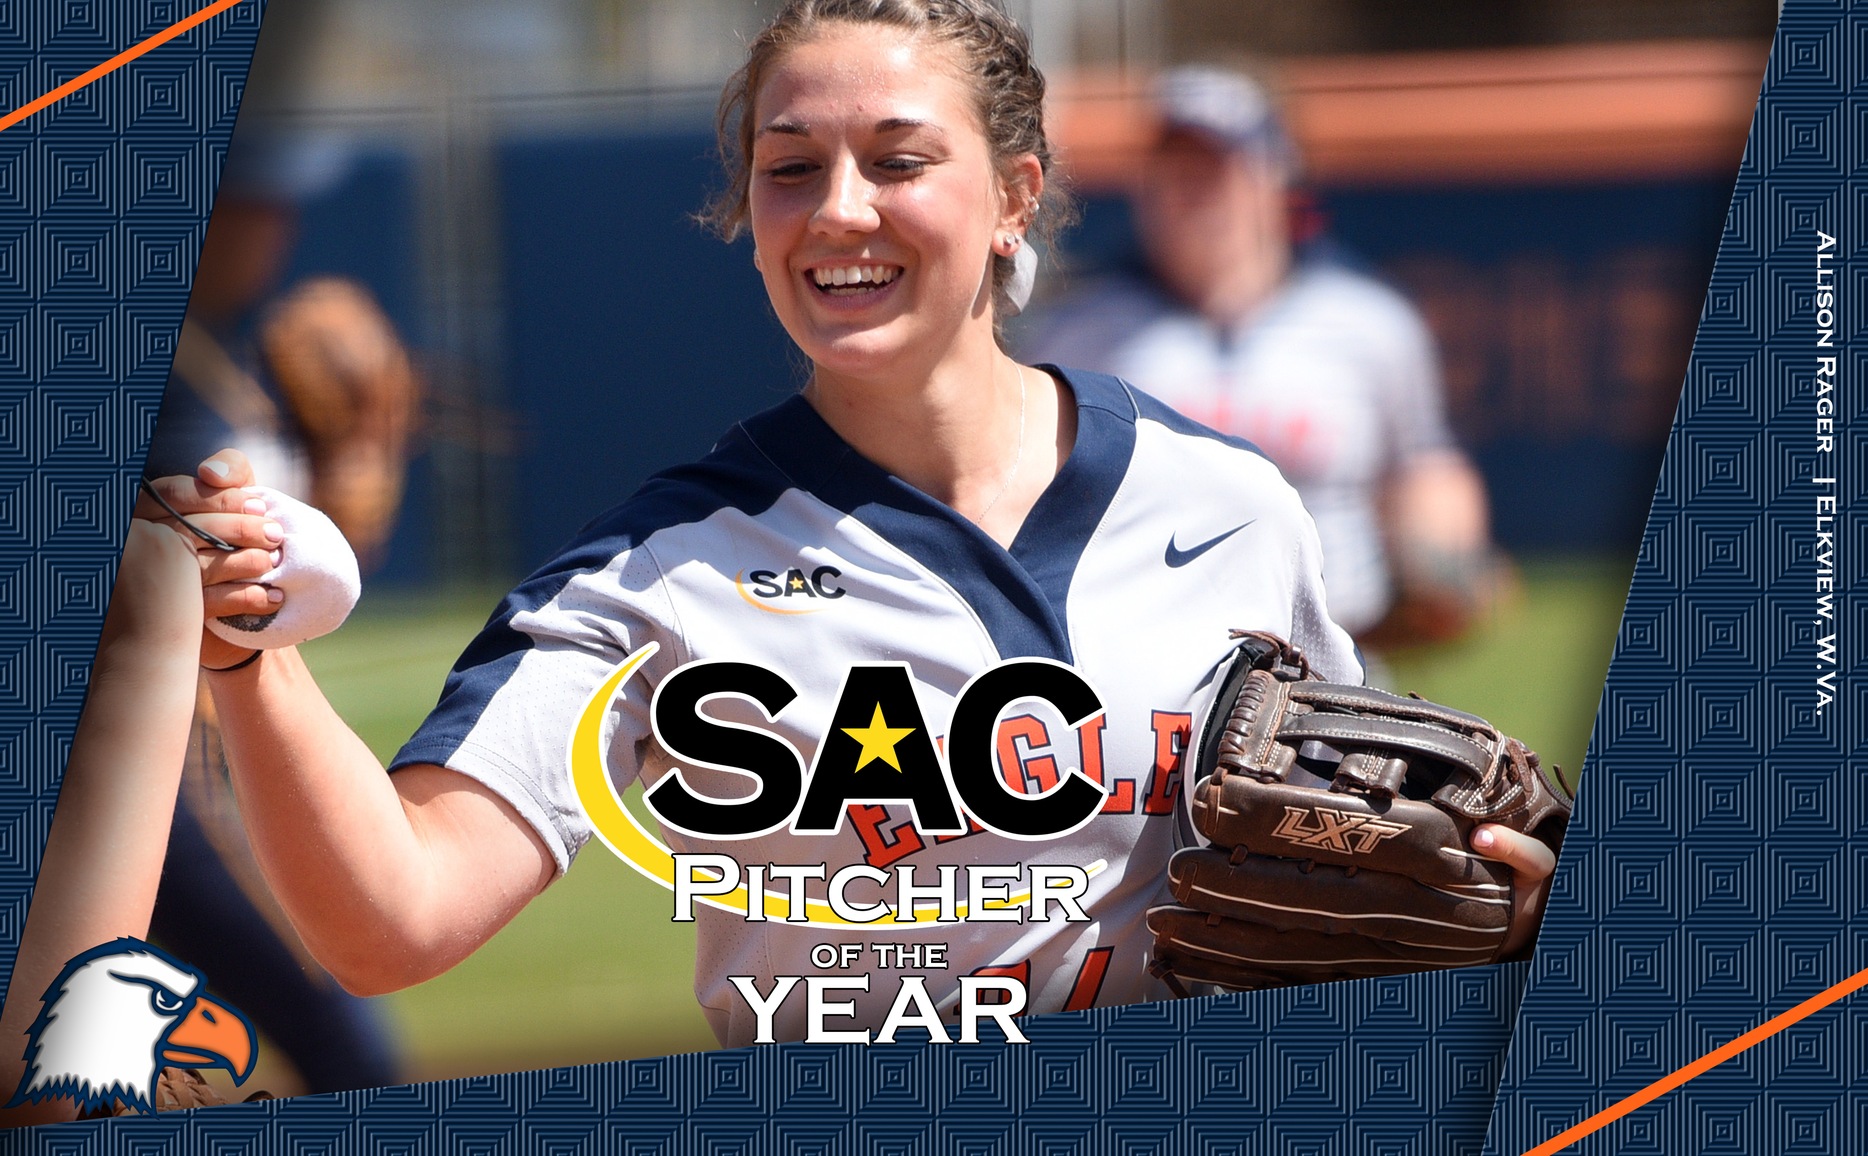 Rager named Pitcher of the Year, four Eagles receive All-SAC laurels